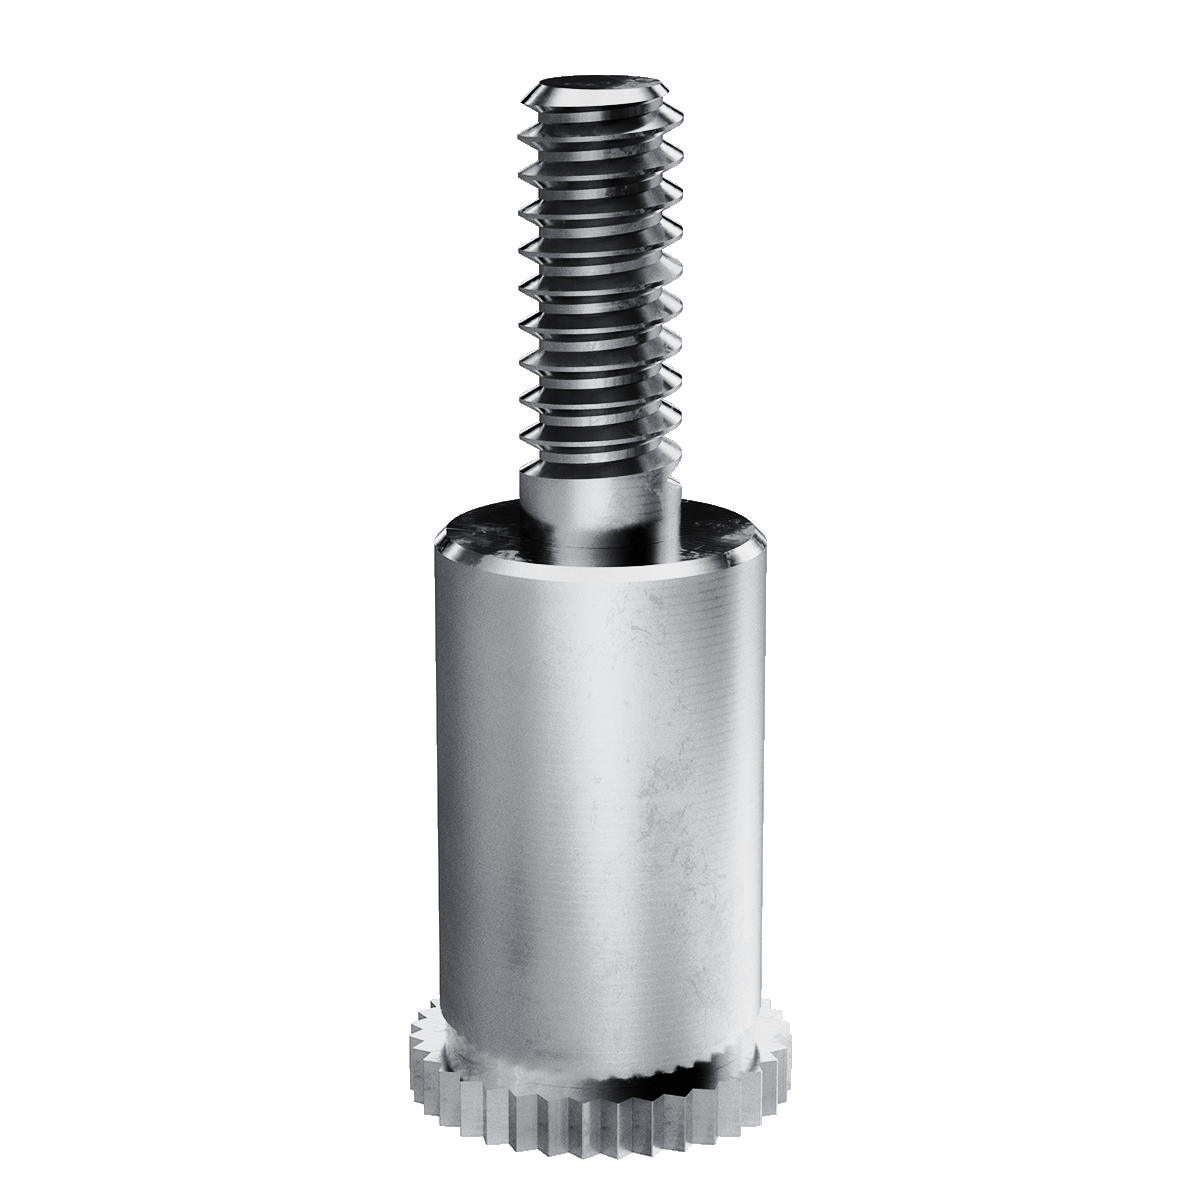 Self-Clinching Standoff, Male, Stainless Steel, Passivated, Imperial, 6-32 x 0.375, 0.281 Hole Dia., 100 Pack